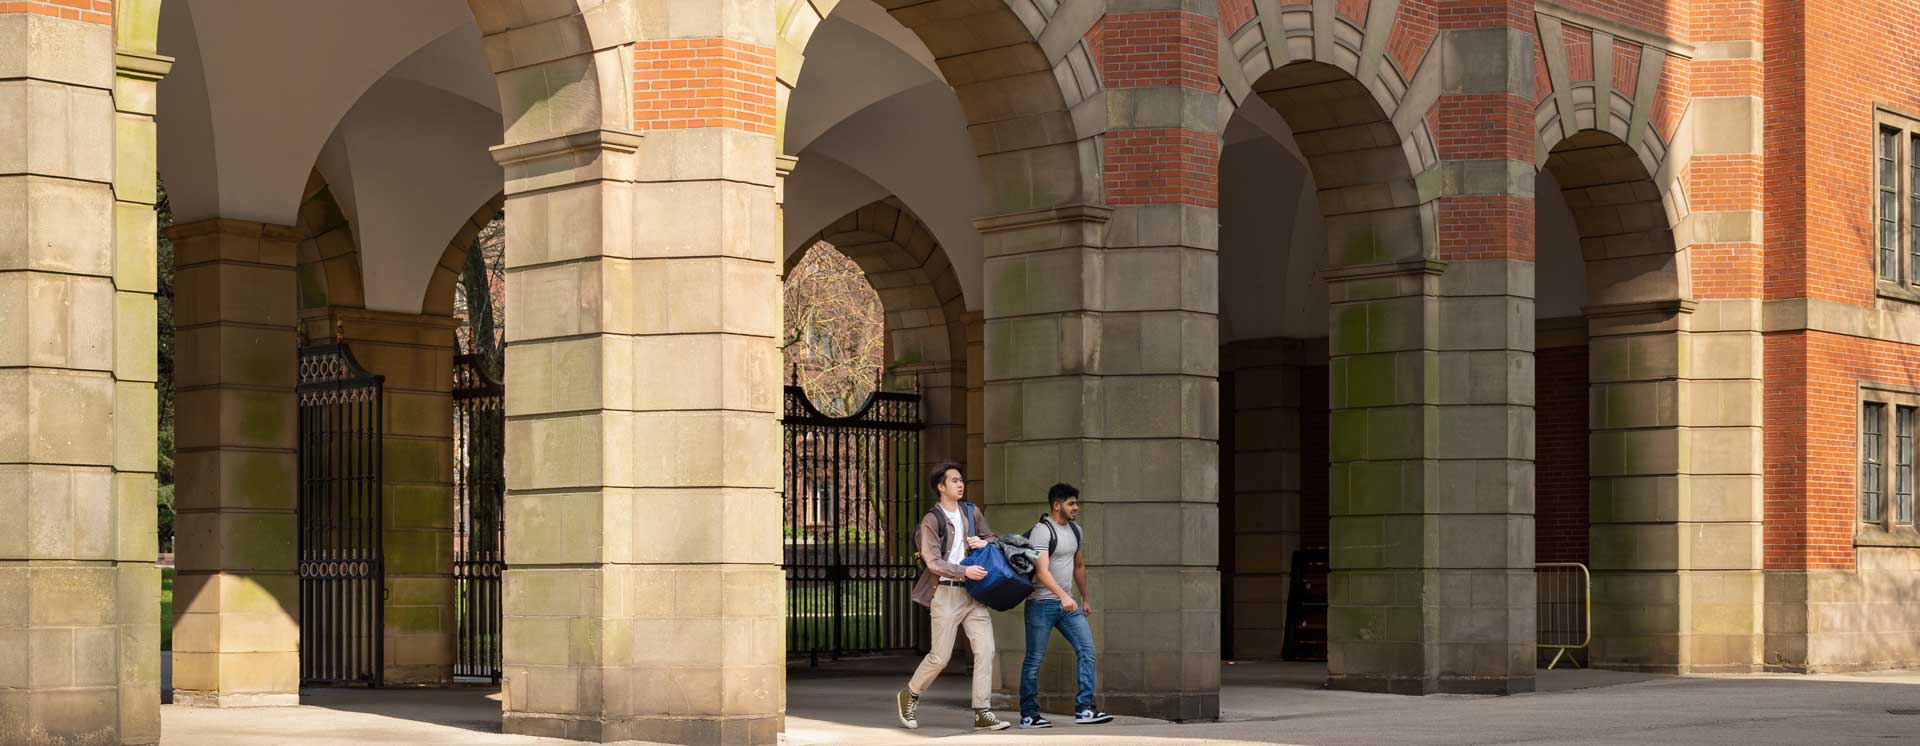 Law School arches with students walking